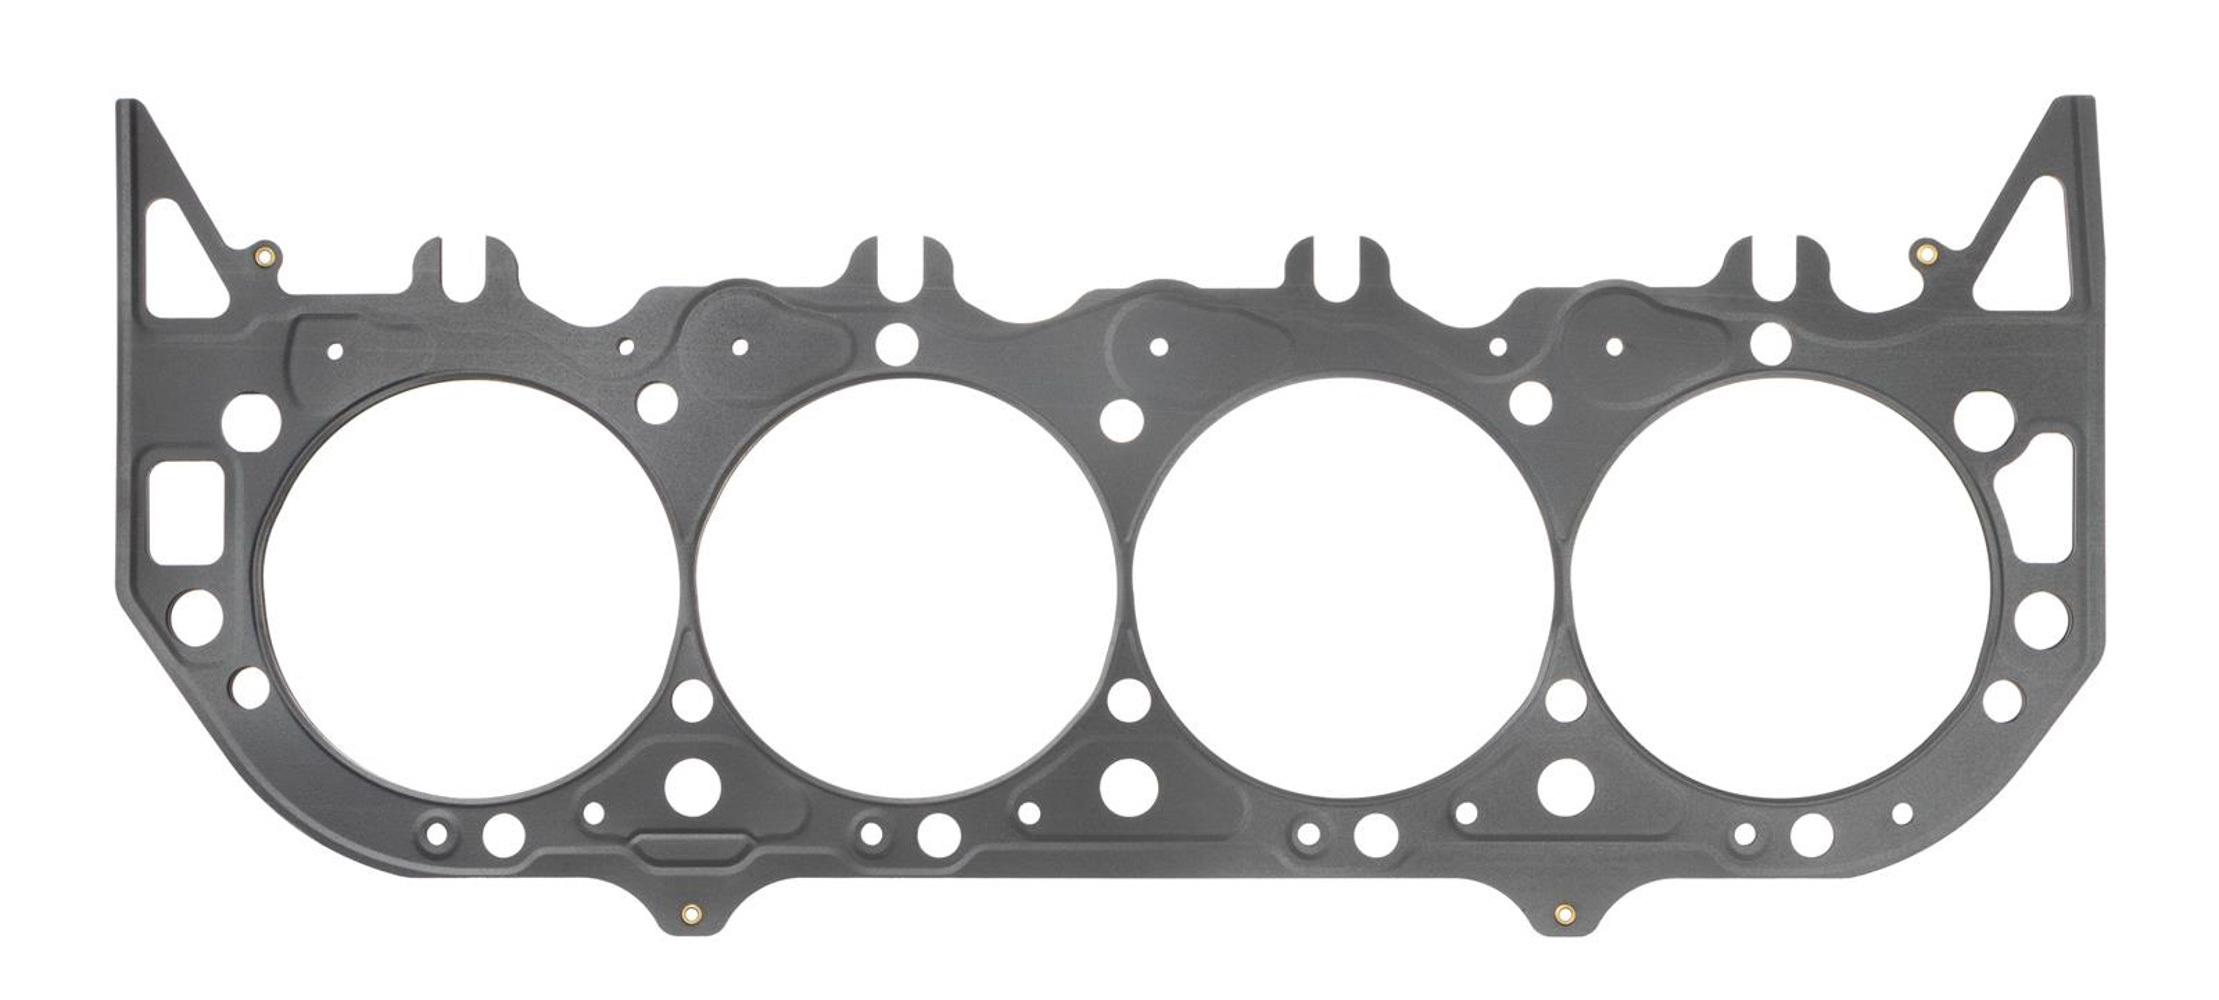 SCE Gaskets M135451 - Cylinder Head Gasket, MLS Spartan, 4.540 in Bore, 0.051 in Compression Thickness, Multi-Layer Steel, Big Block Chevy, Each